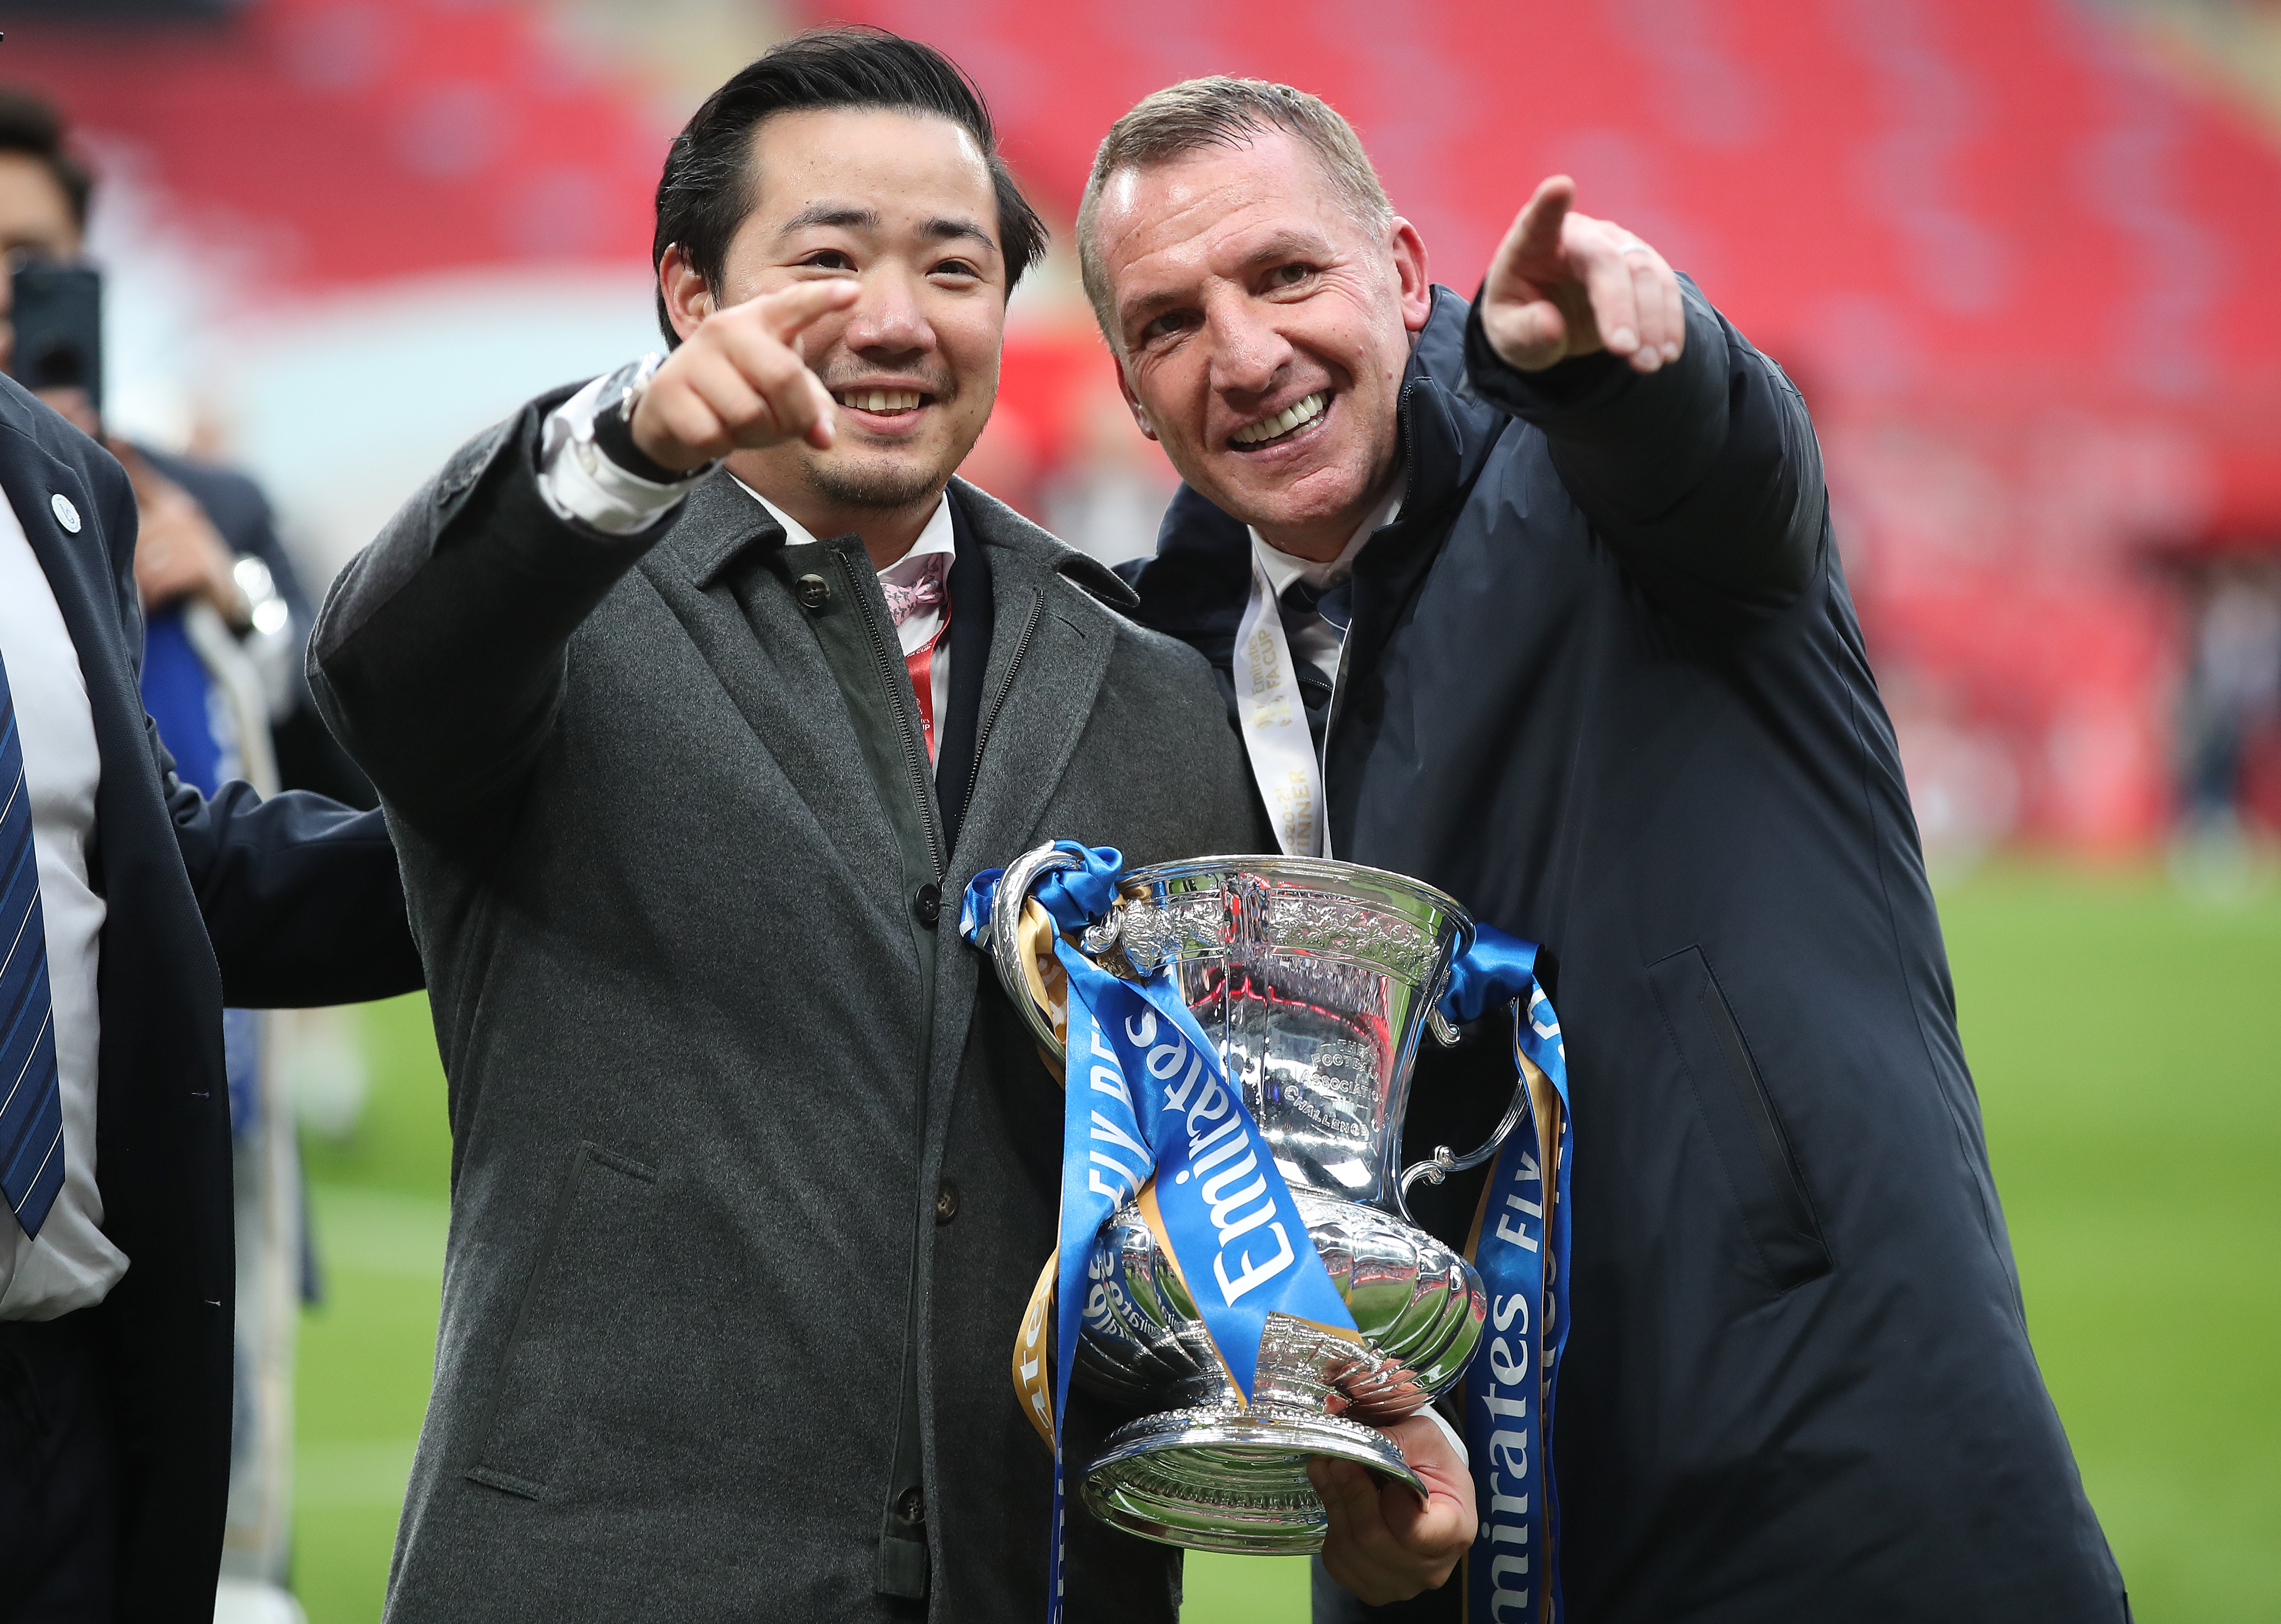 Leicester chairman Aiyawatt Srivaddhanaprabha, left, and manager Brendan Rodgers with the FA Cup trophy